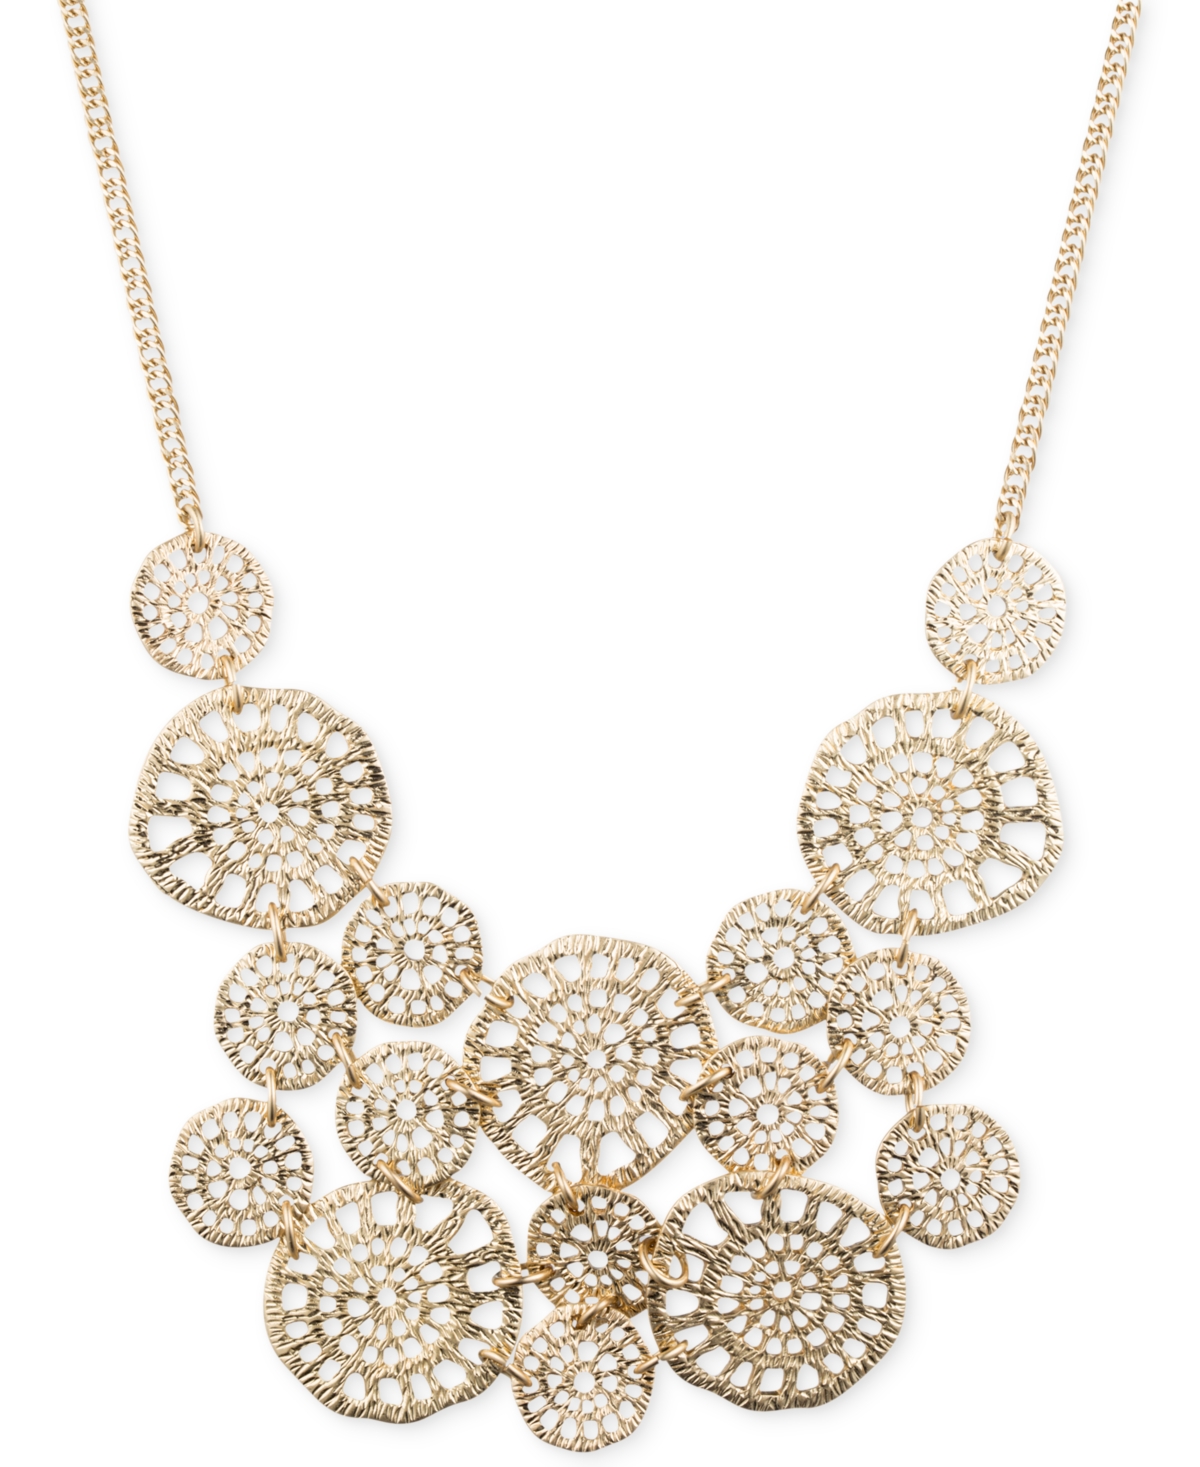 Gold-Tone Textured Disc Drama Necklace - Gold